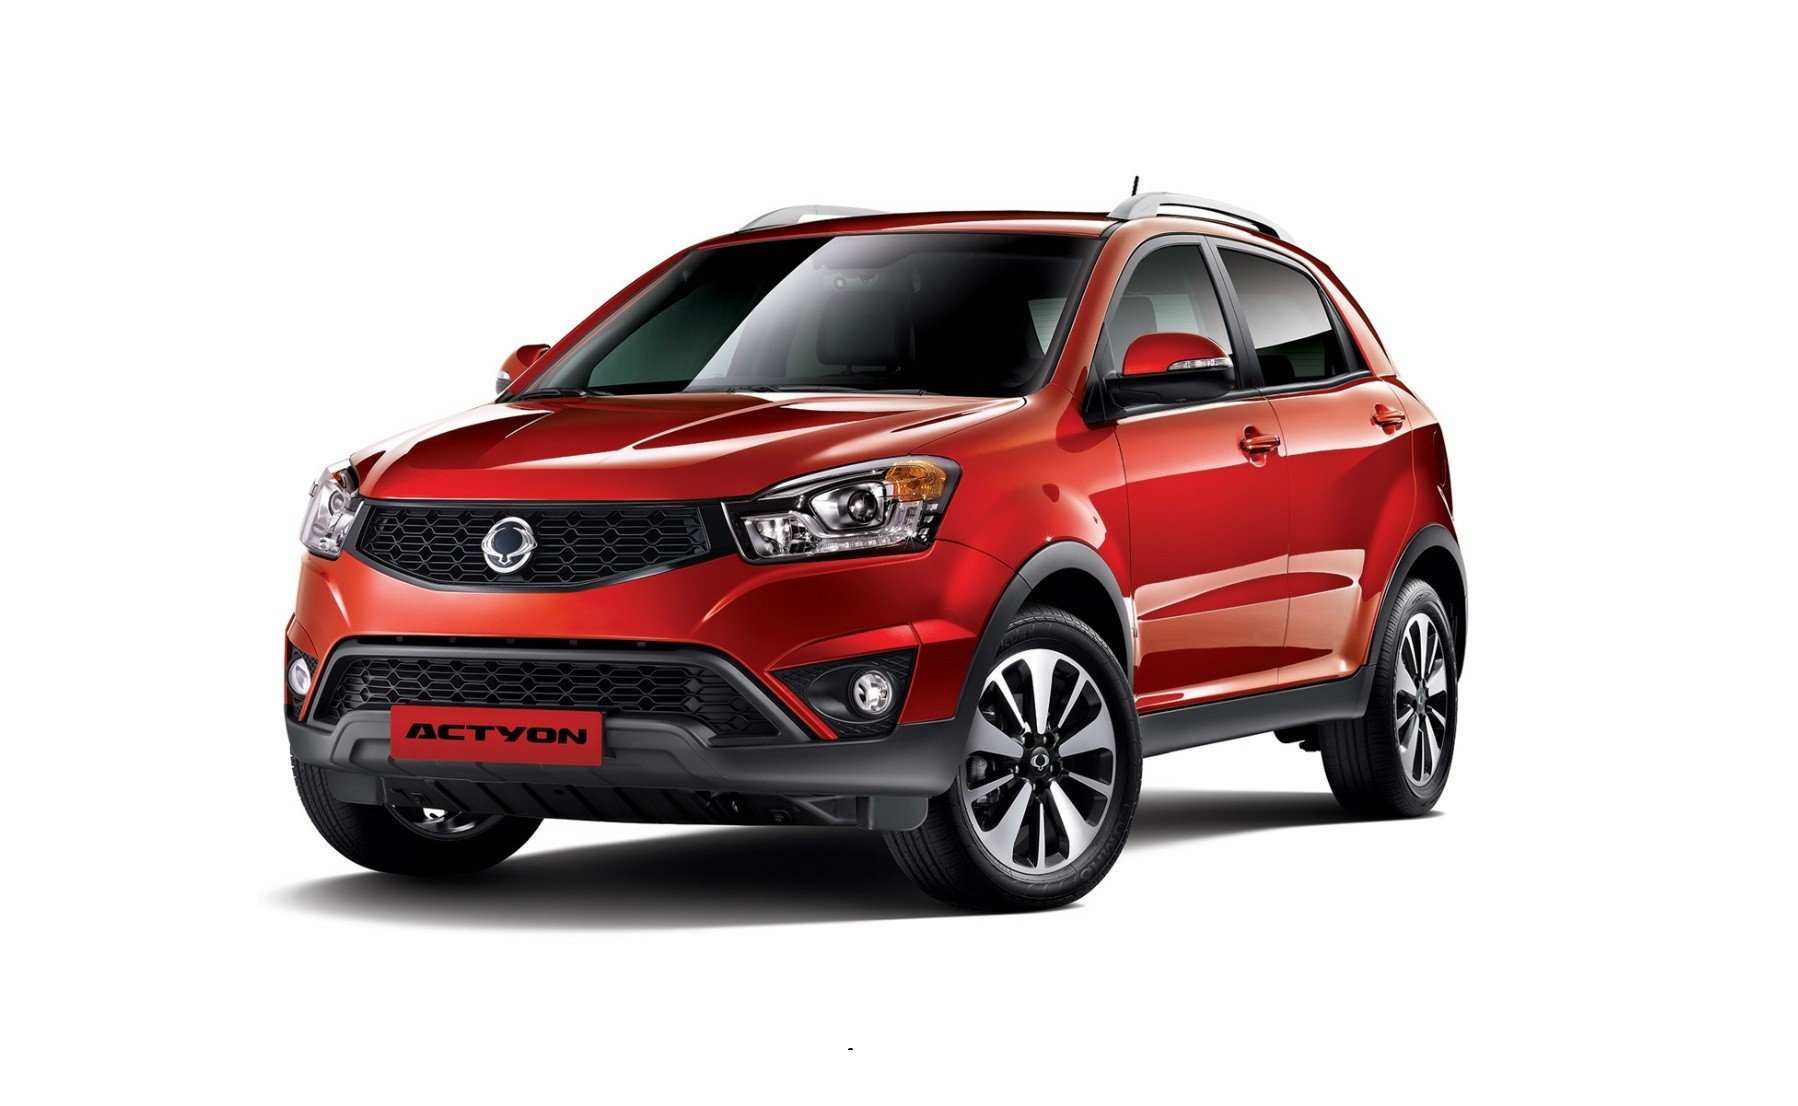 Санг енг актион автомат. SSANGYONG Actyon II. SSANGYOUNG Act. SSANGYONG Actyon 2013. SSANGYONG Actyon New 2022.